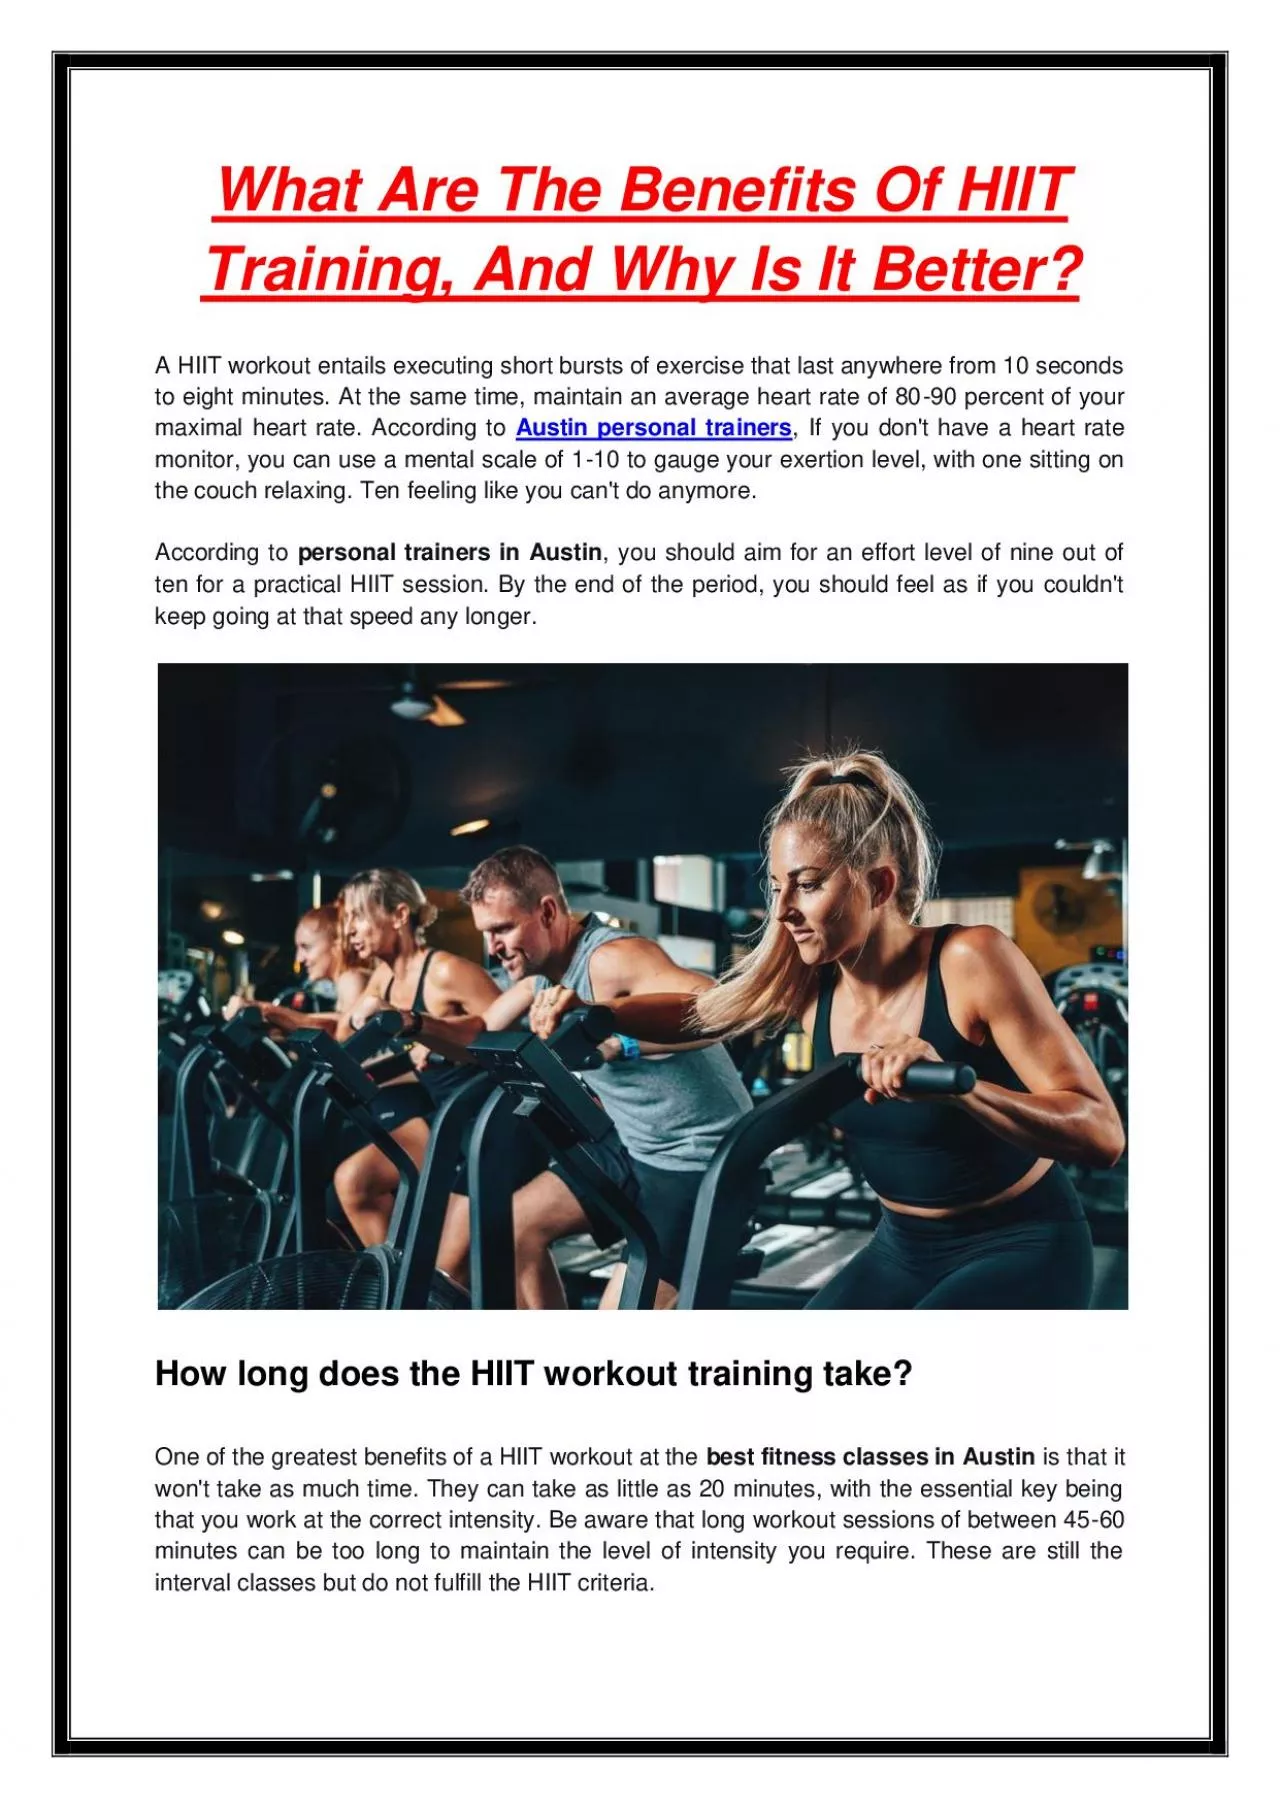 What Are The Benefits Of HIIT Training, And Why Is It Better?